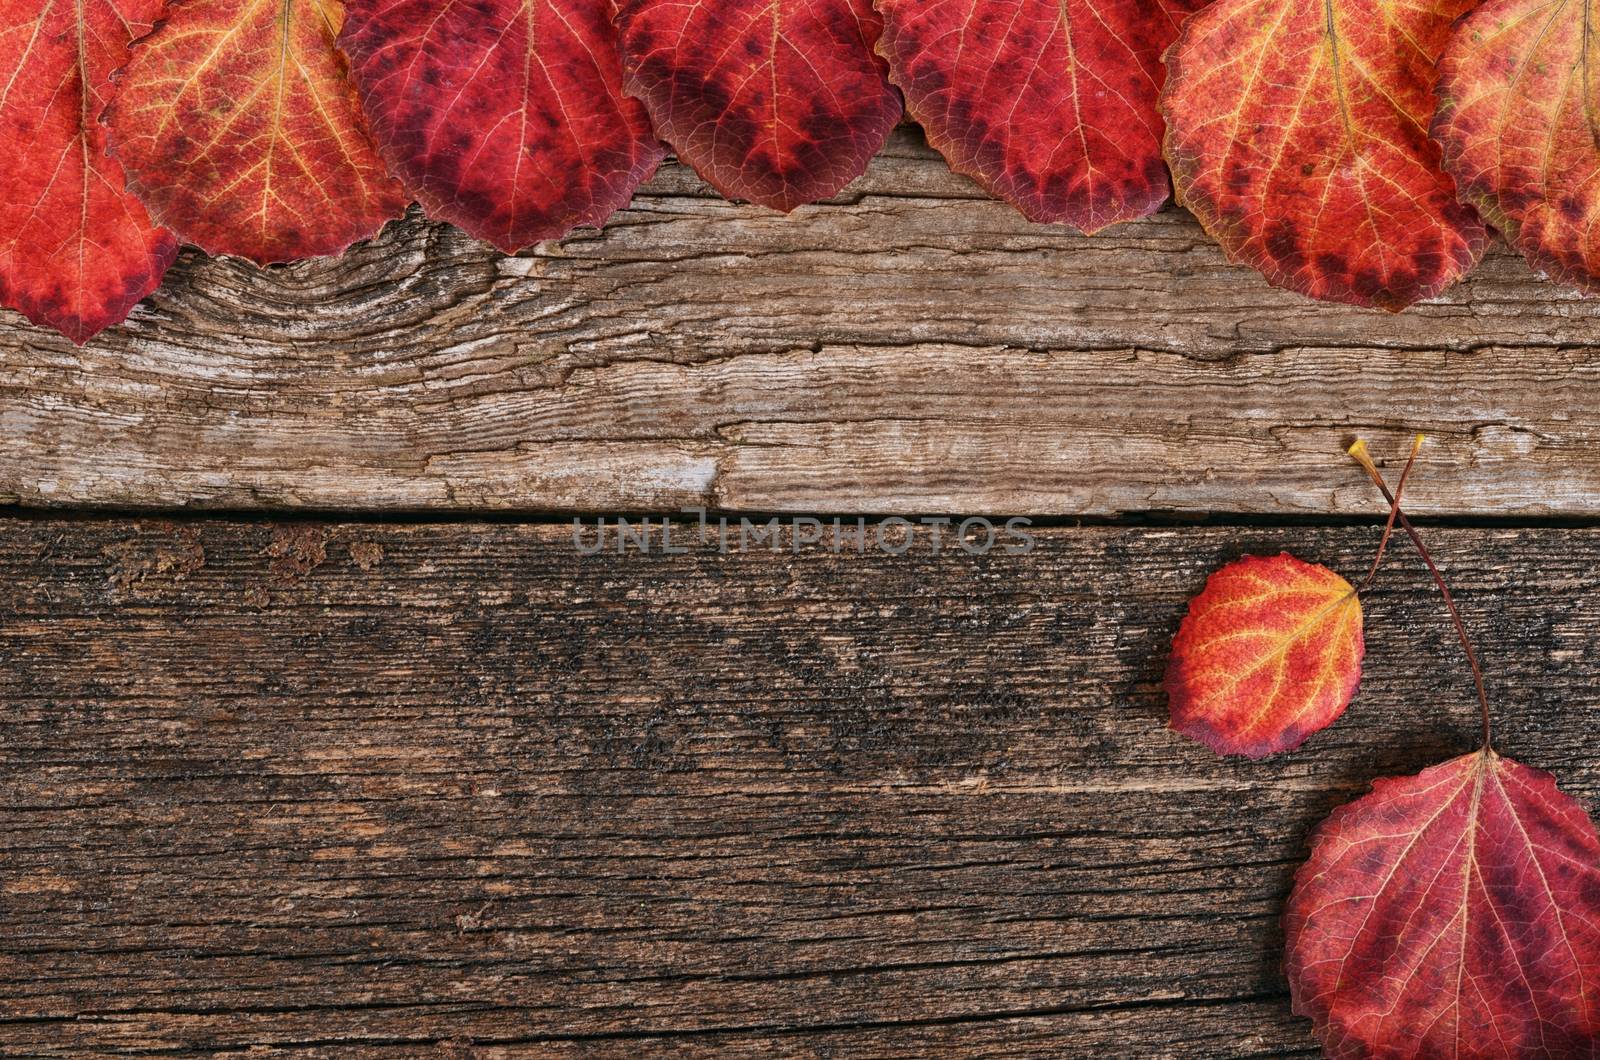 The autumn leaves on wooden background by SvetaVo